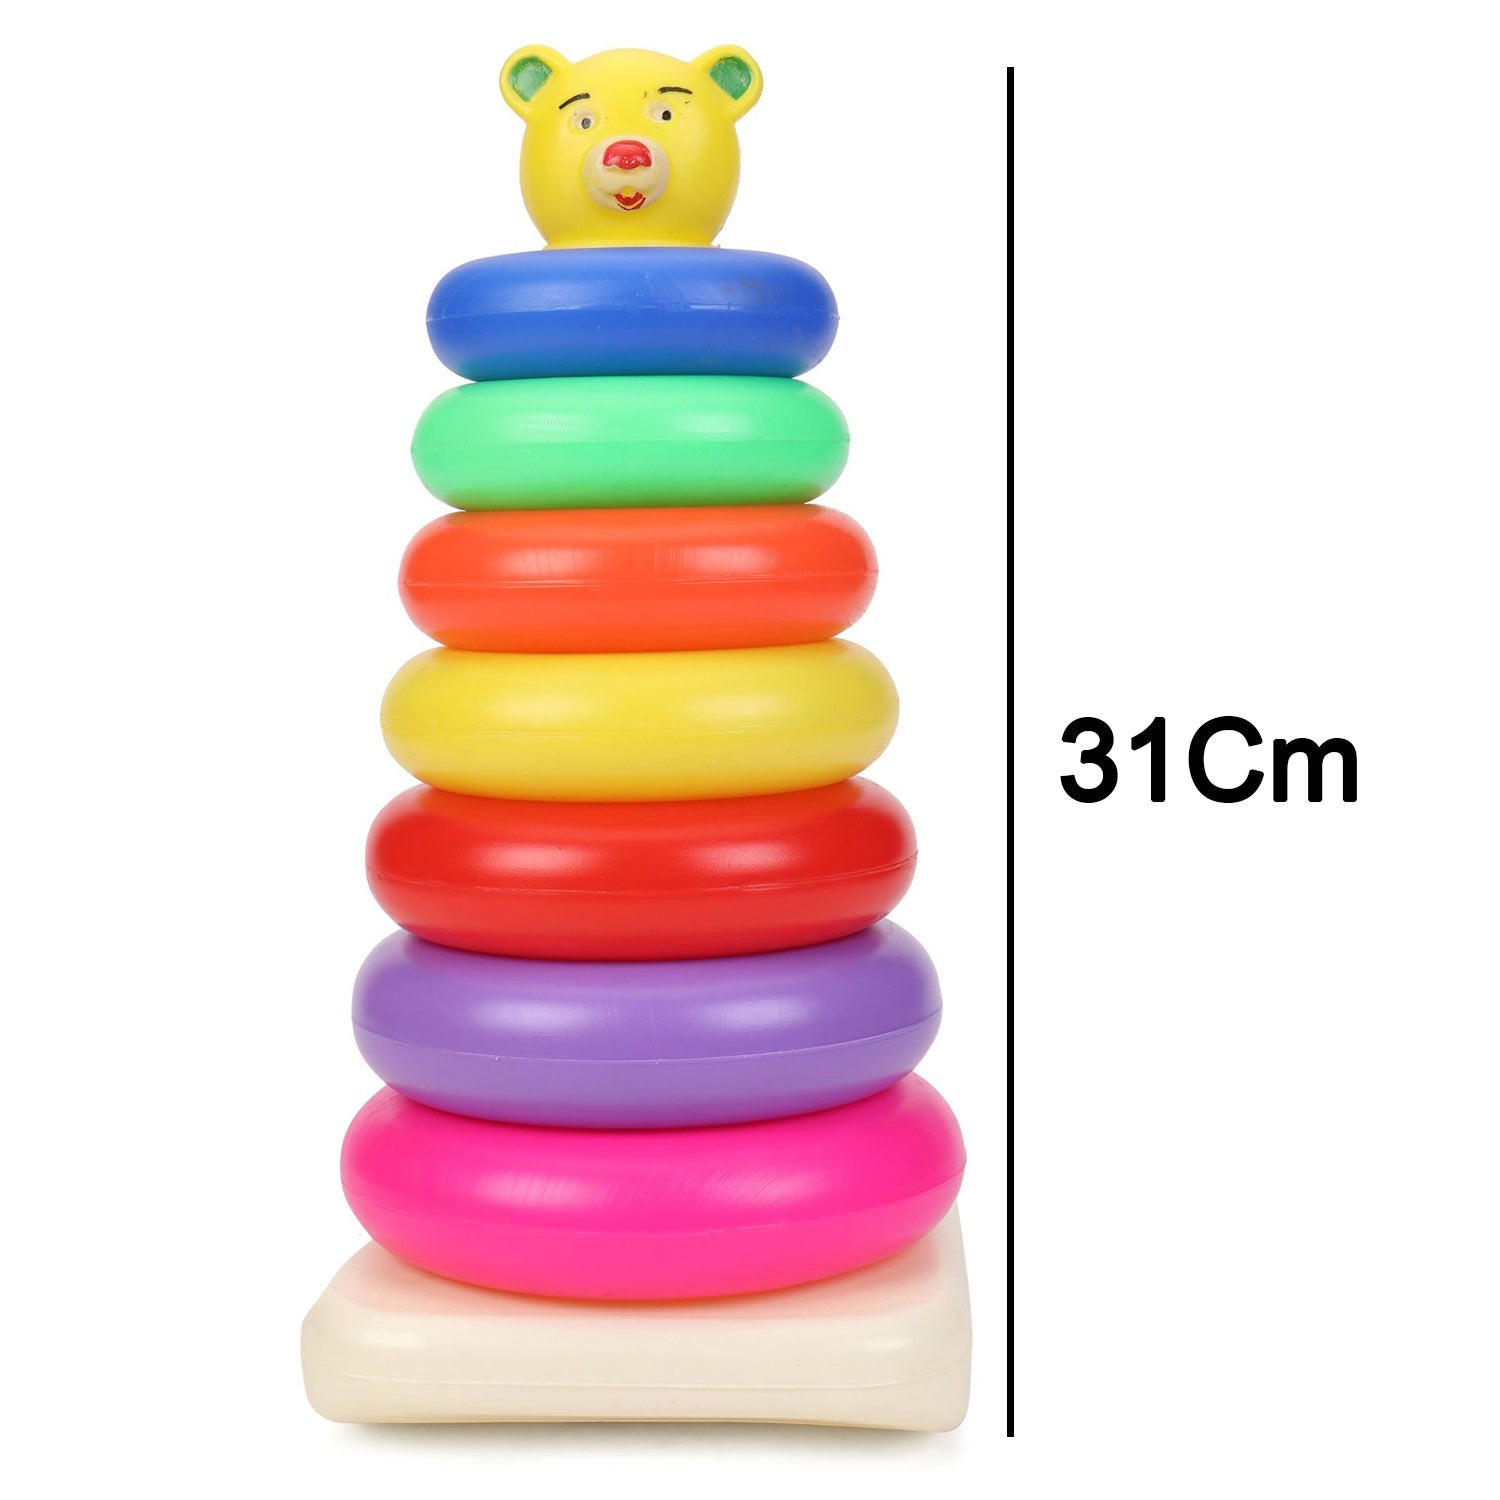 8016 Plastic Baby Kids Teddy Stacking Ring Jumbo Stack Up Educational Toy 7pc DeoDap